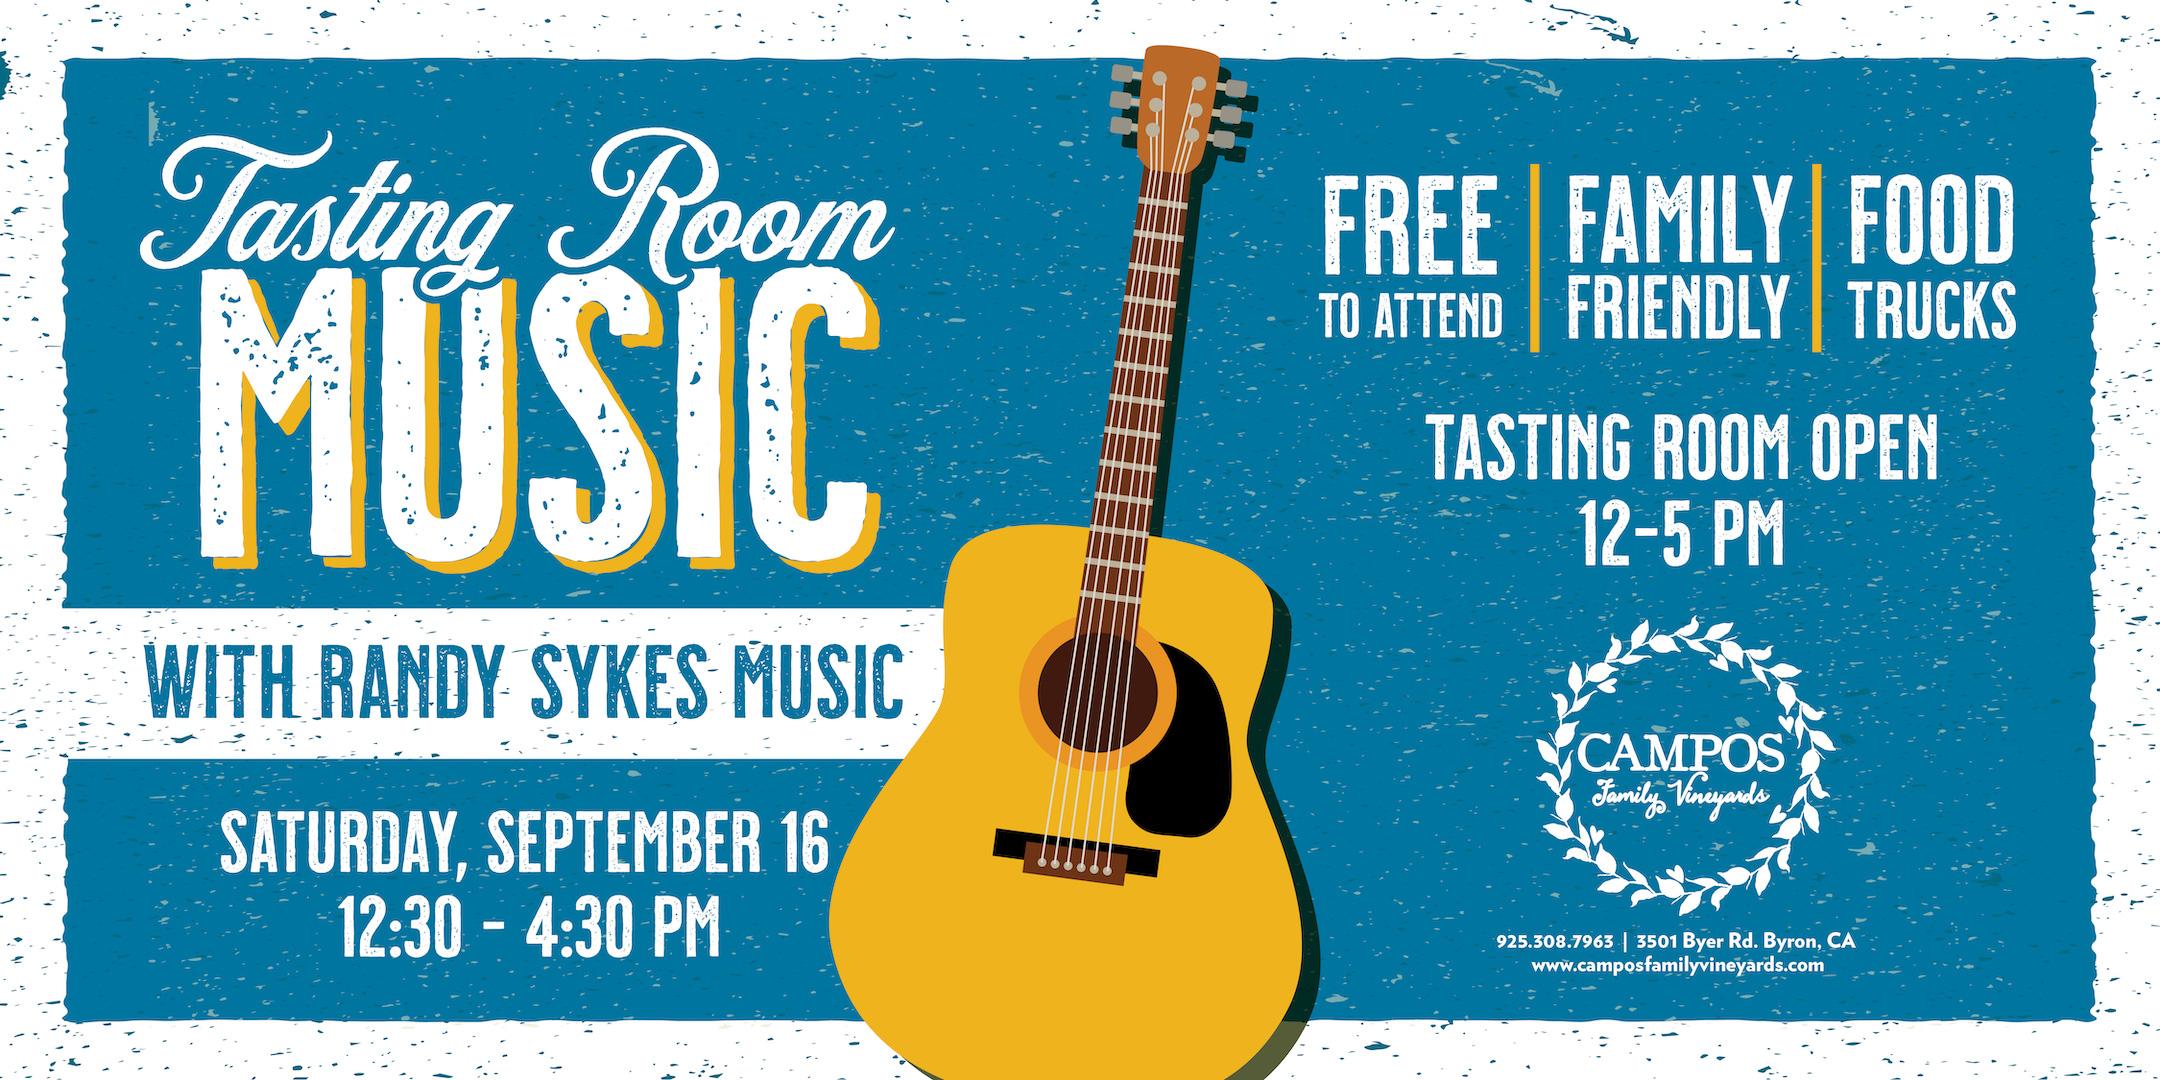 LIVE MUSIC with Randy Sykes!